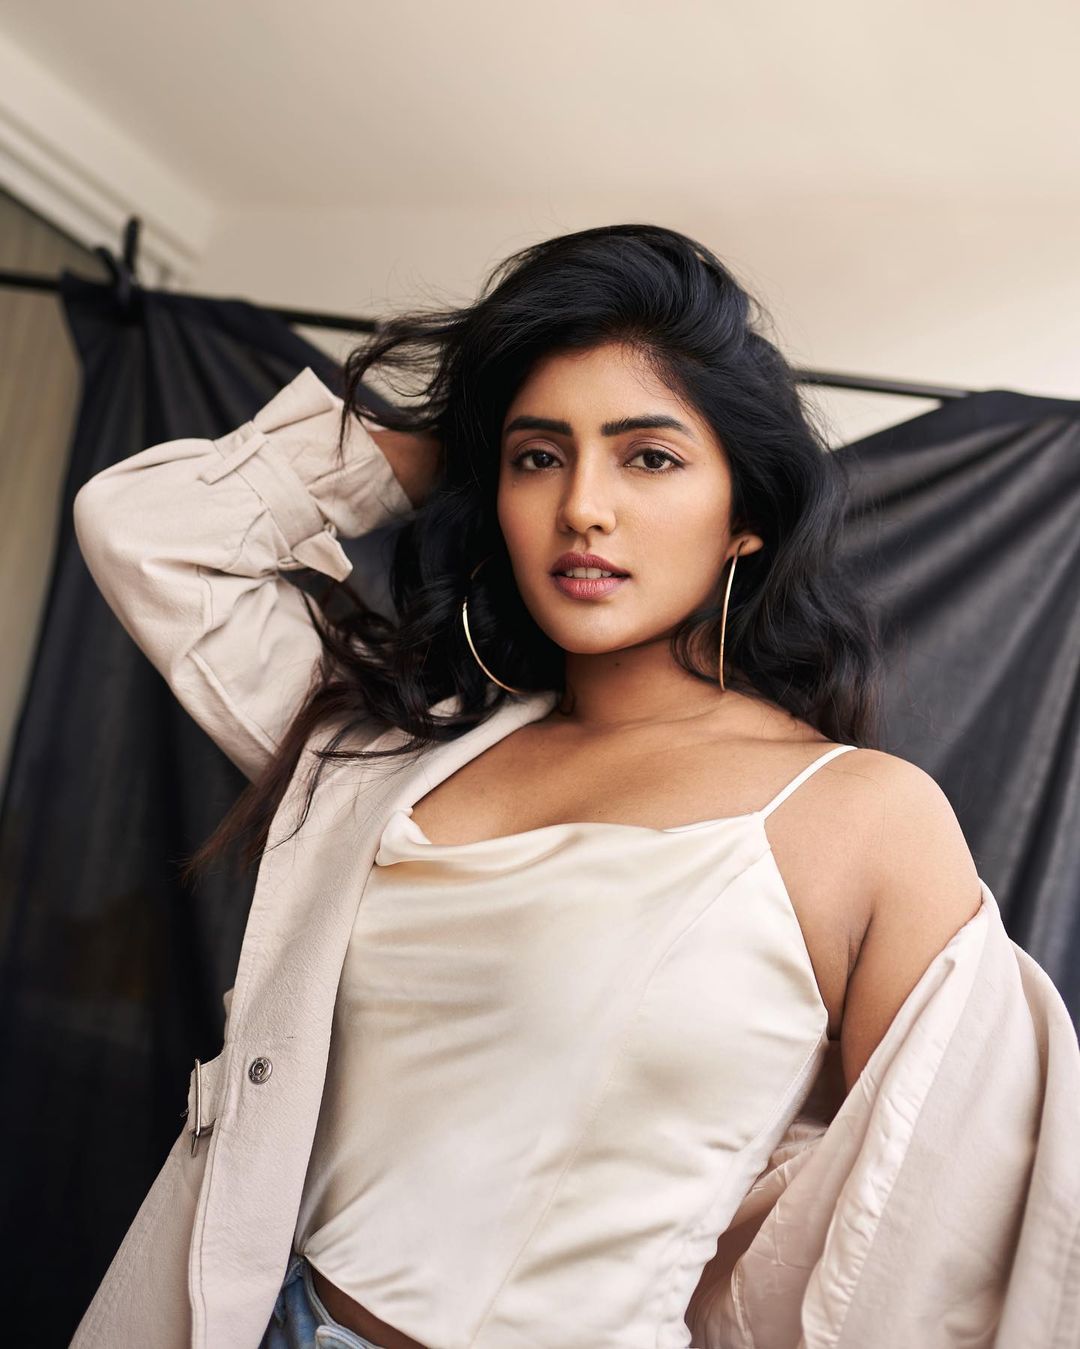 eesha rebba hot photos in modern glamour dress getting viral